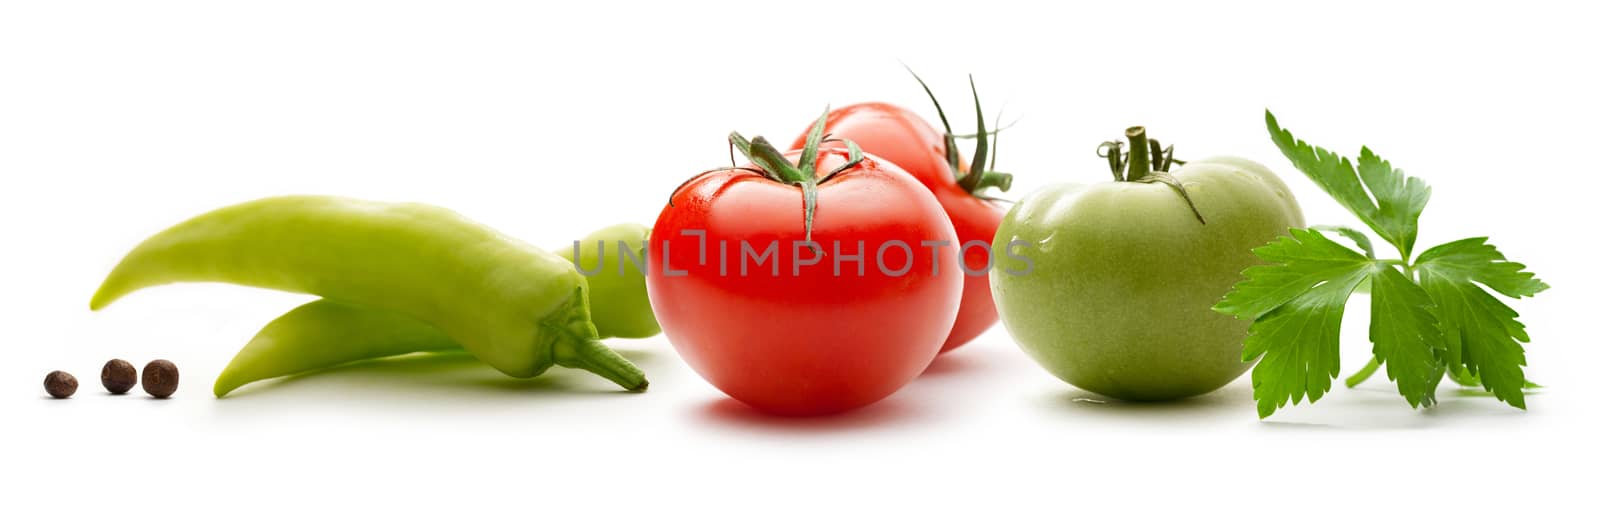 Red and green tomatoes with paprika and pepper